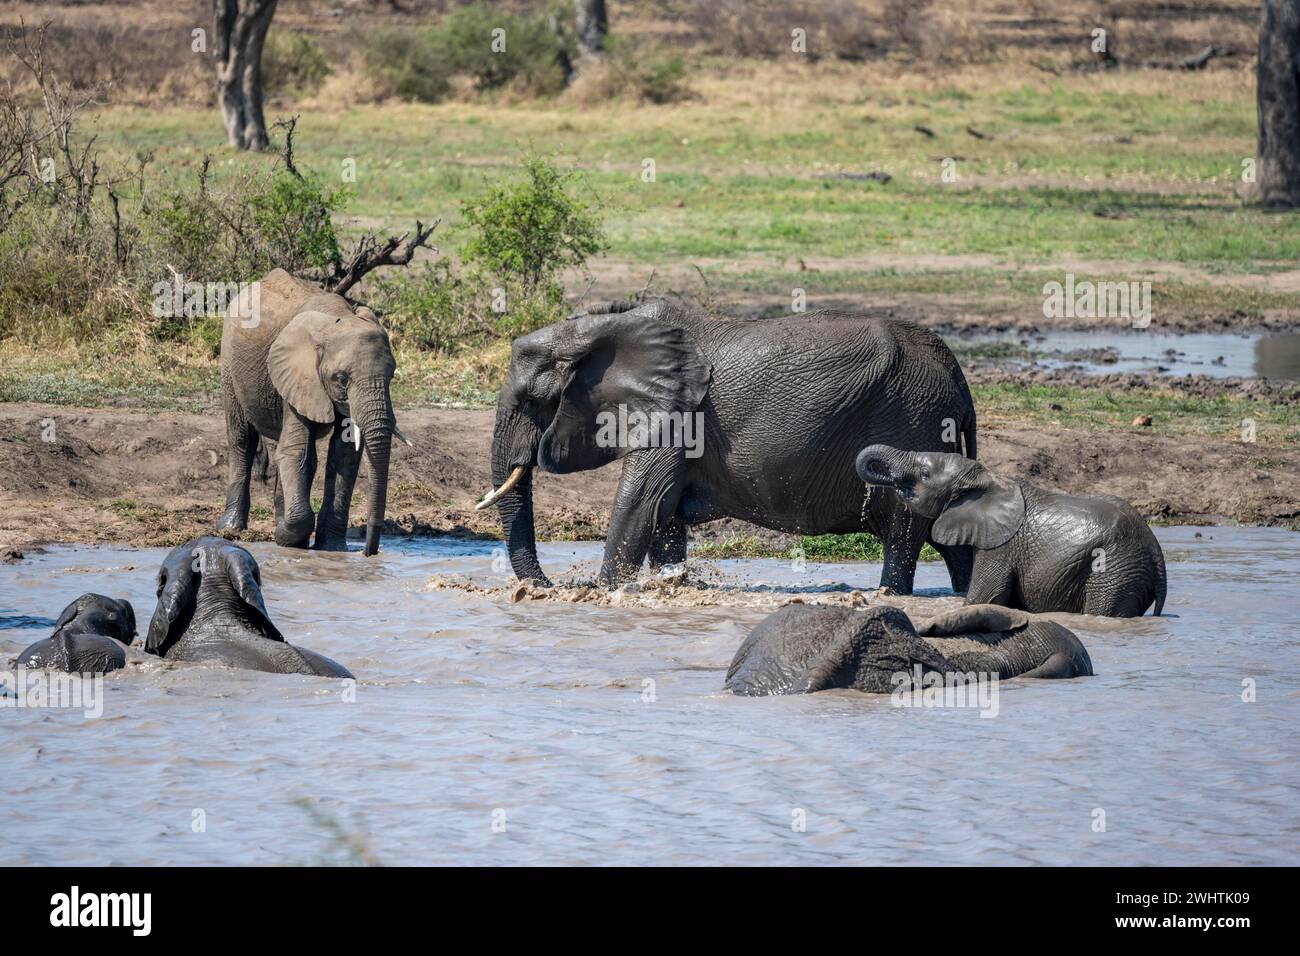 African elephants (Loxodonta africana), herd bathing and drinking in the water at a lake, Kruger National Park, South Africa Stock Photo